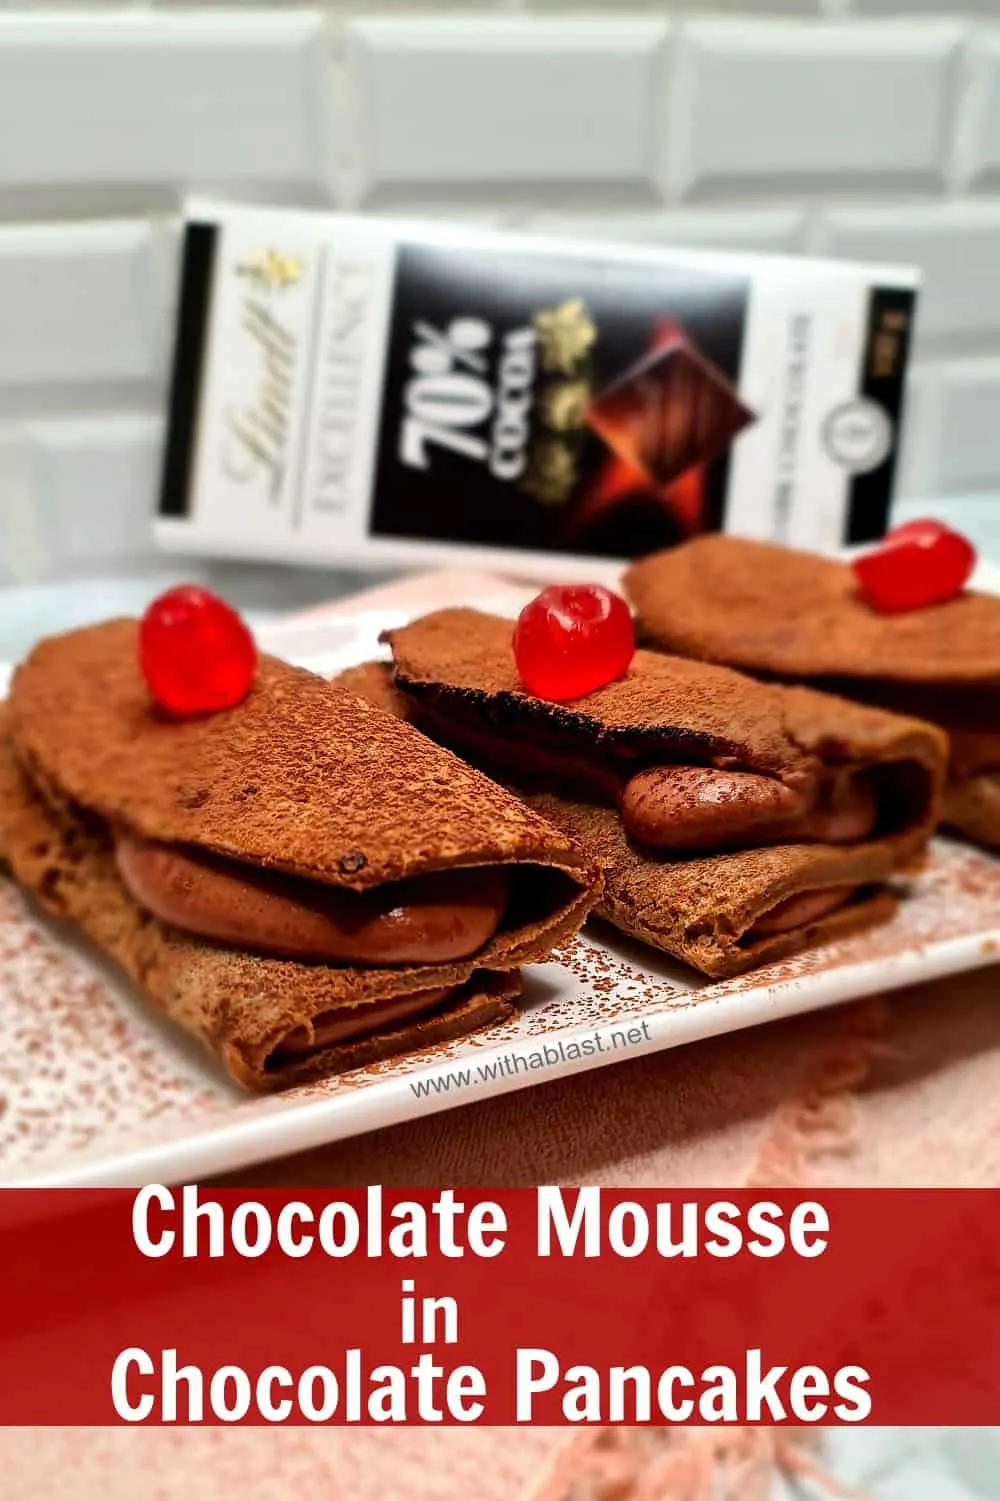 Chocolate Mousse in Chocolate Pancakes